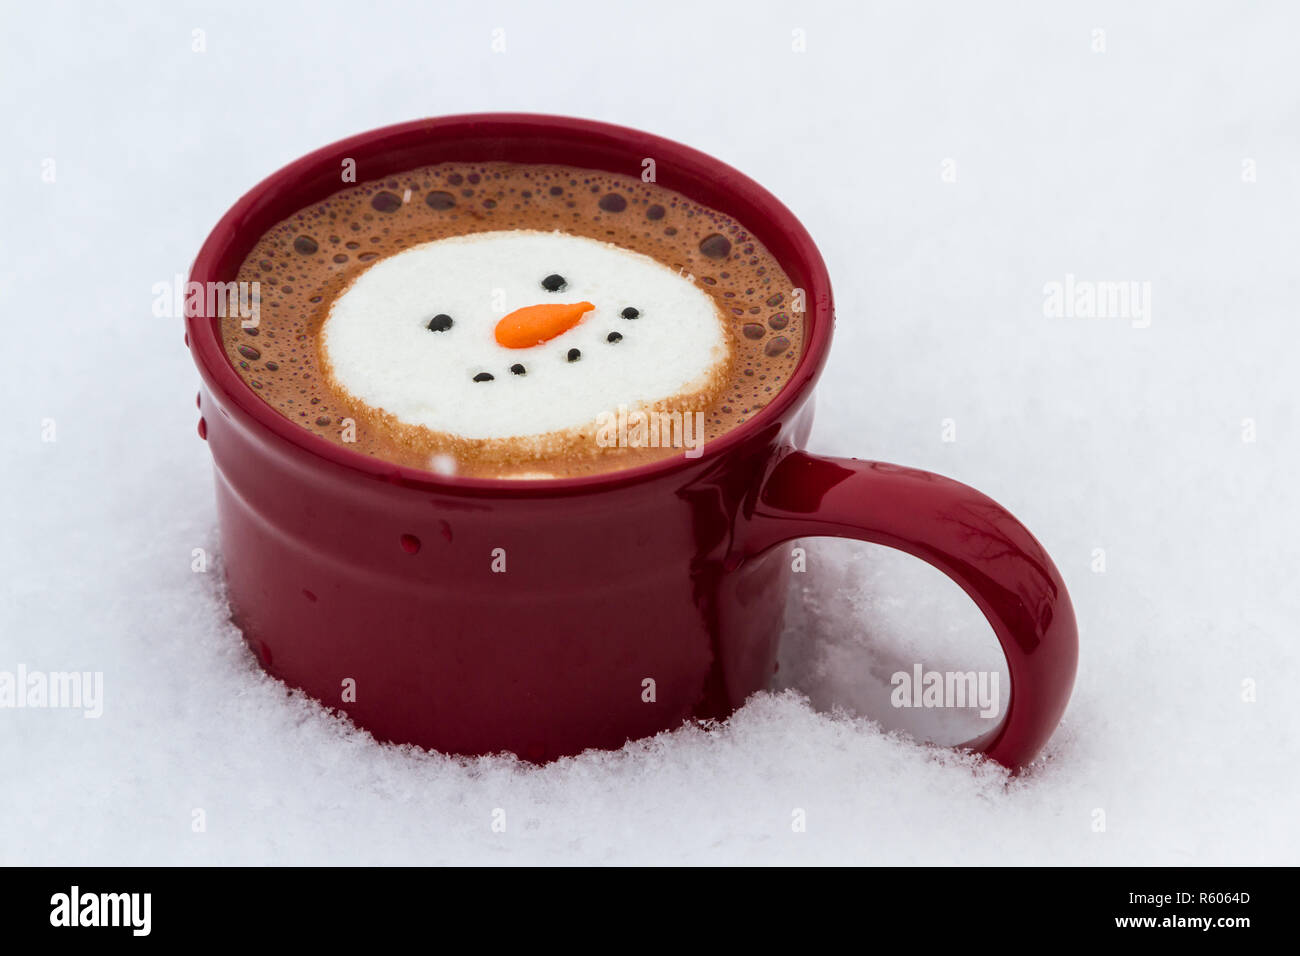 hot cocoa beverage mixed with Irish whiskey garnished with a smiling snow-person marshmallow Stock Photo